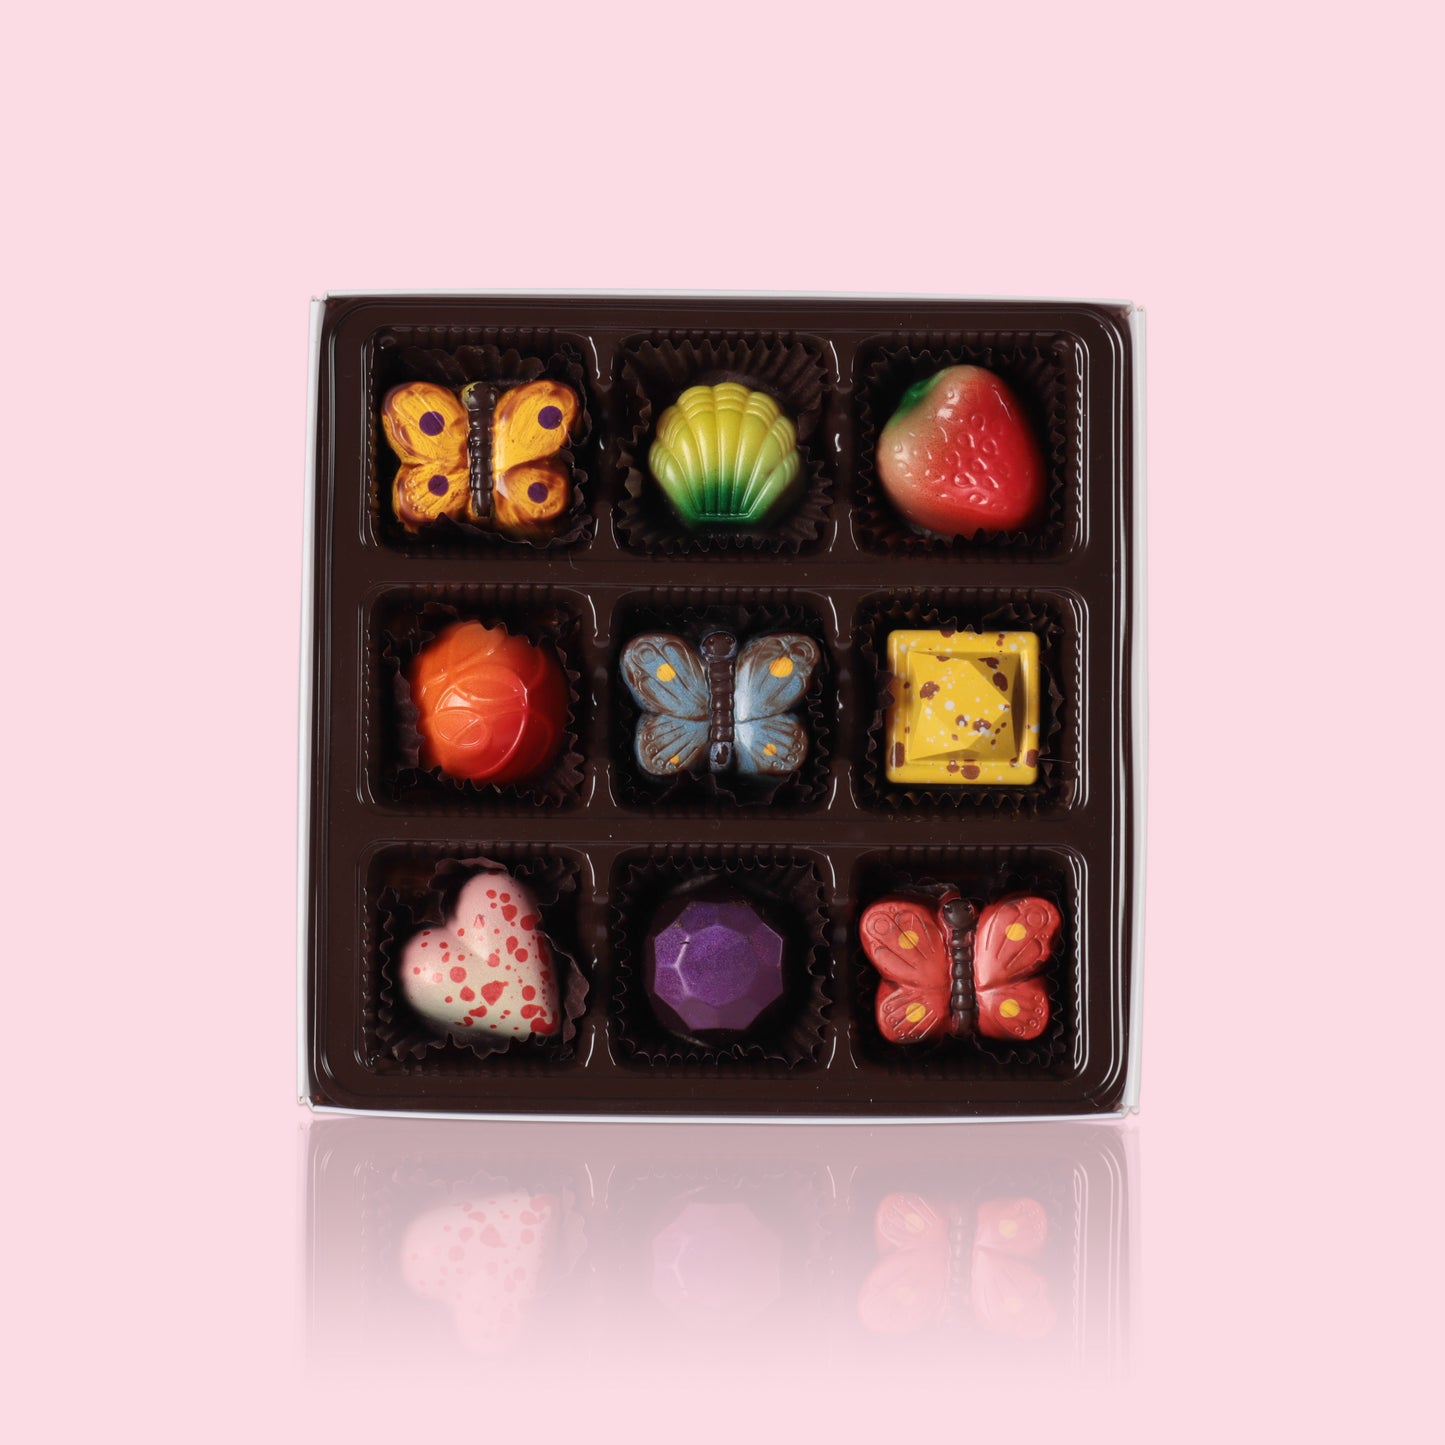 The Chocolaterie Signature Gift Box